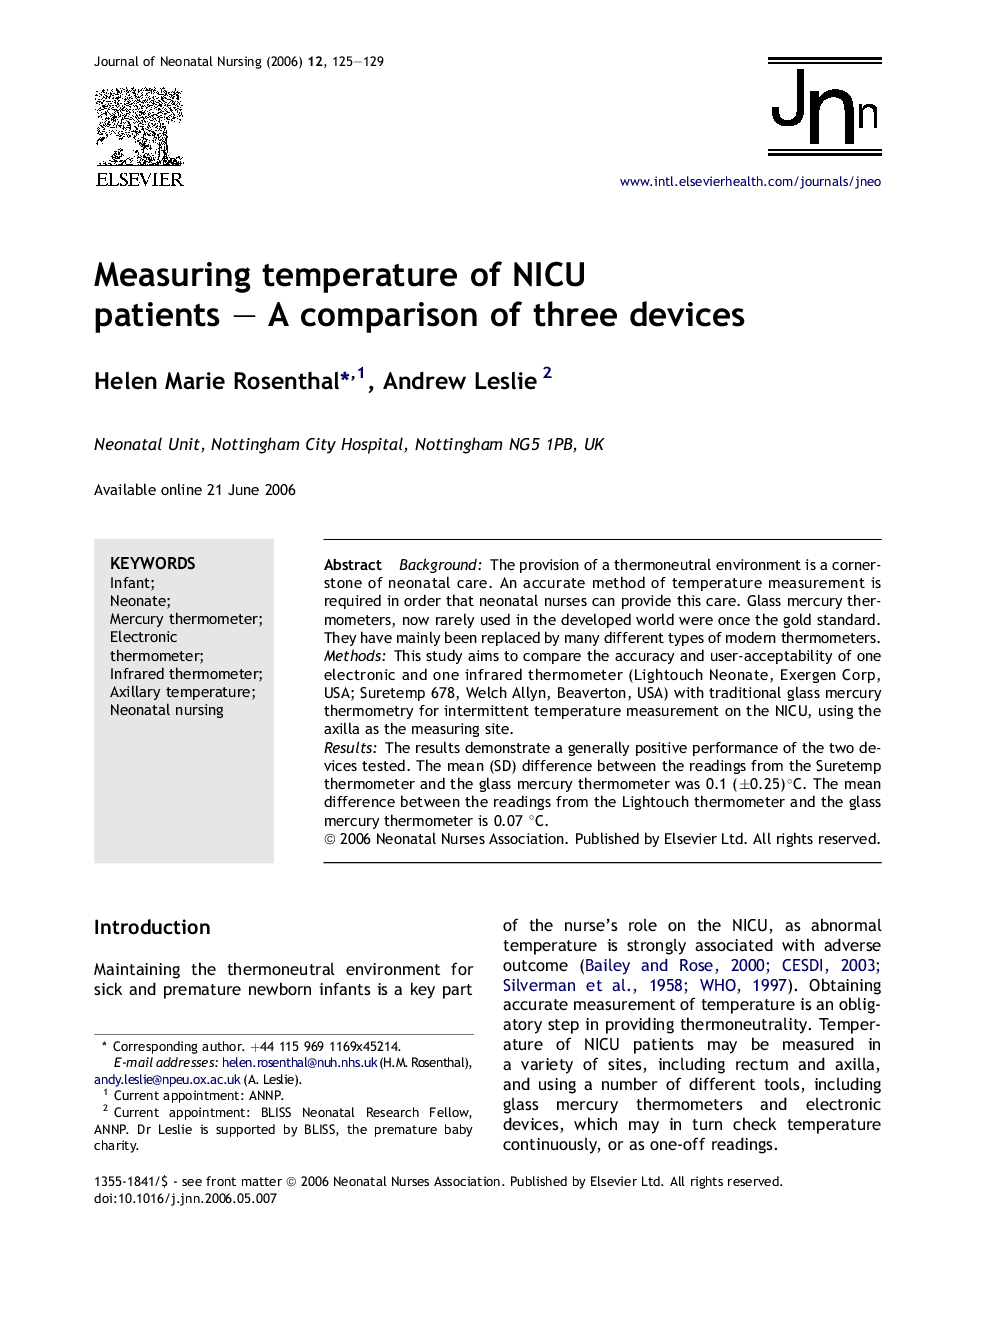 Measuring temperature of NICU patients – A comparison of three devices